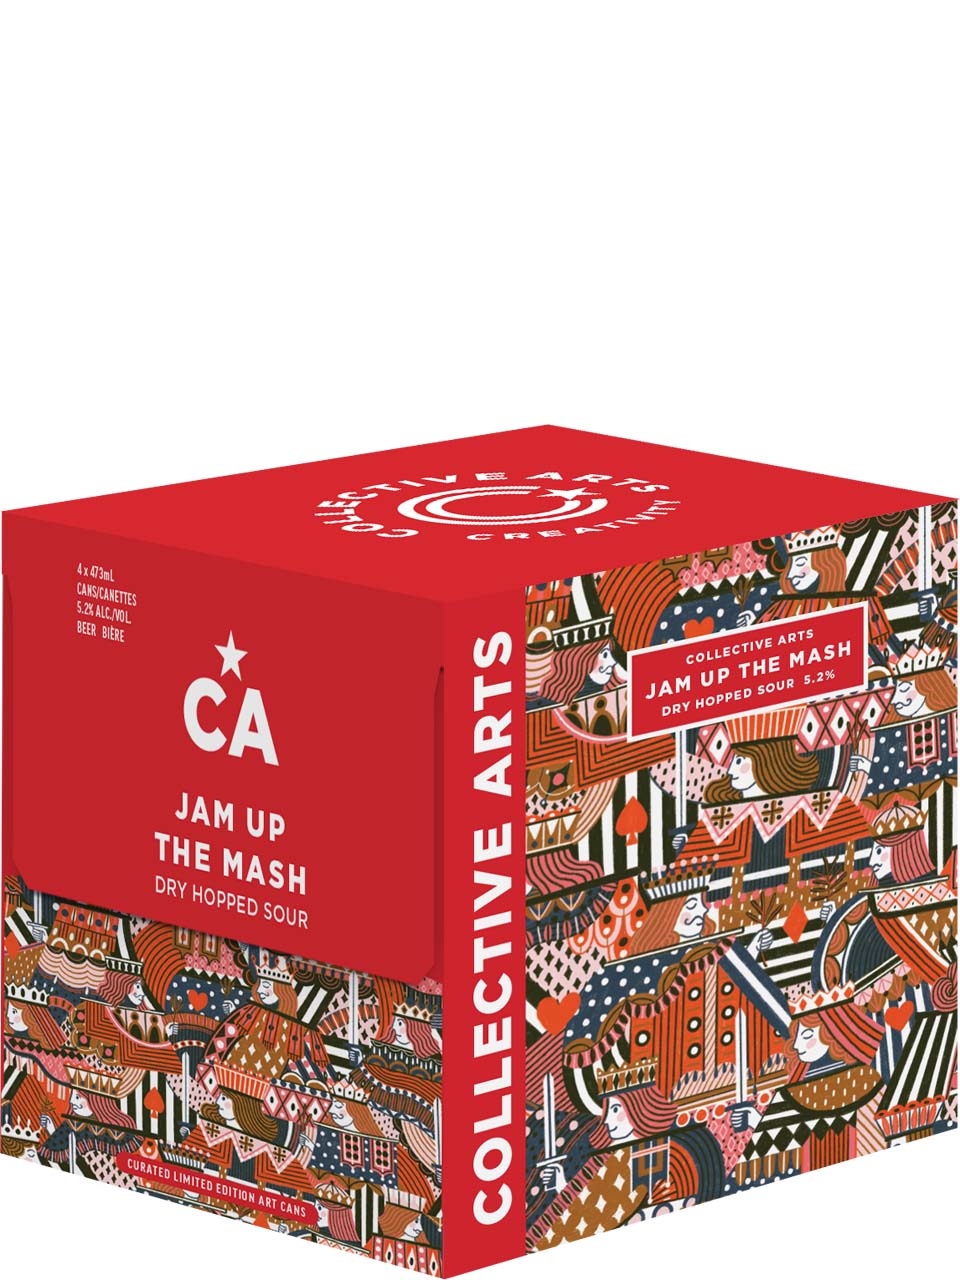 Collective Arts Jam Up the Mash Sour 4 Pack Cans